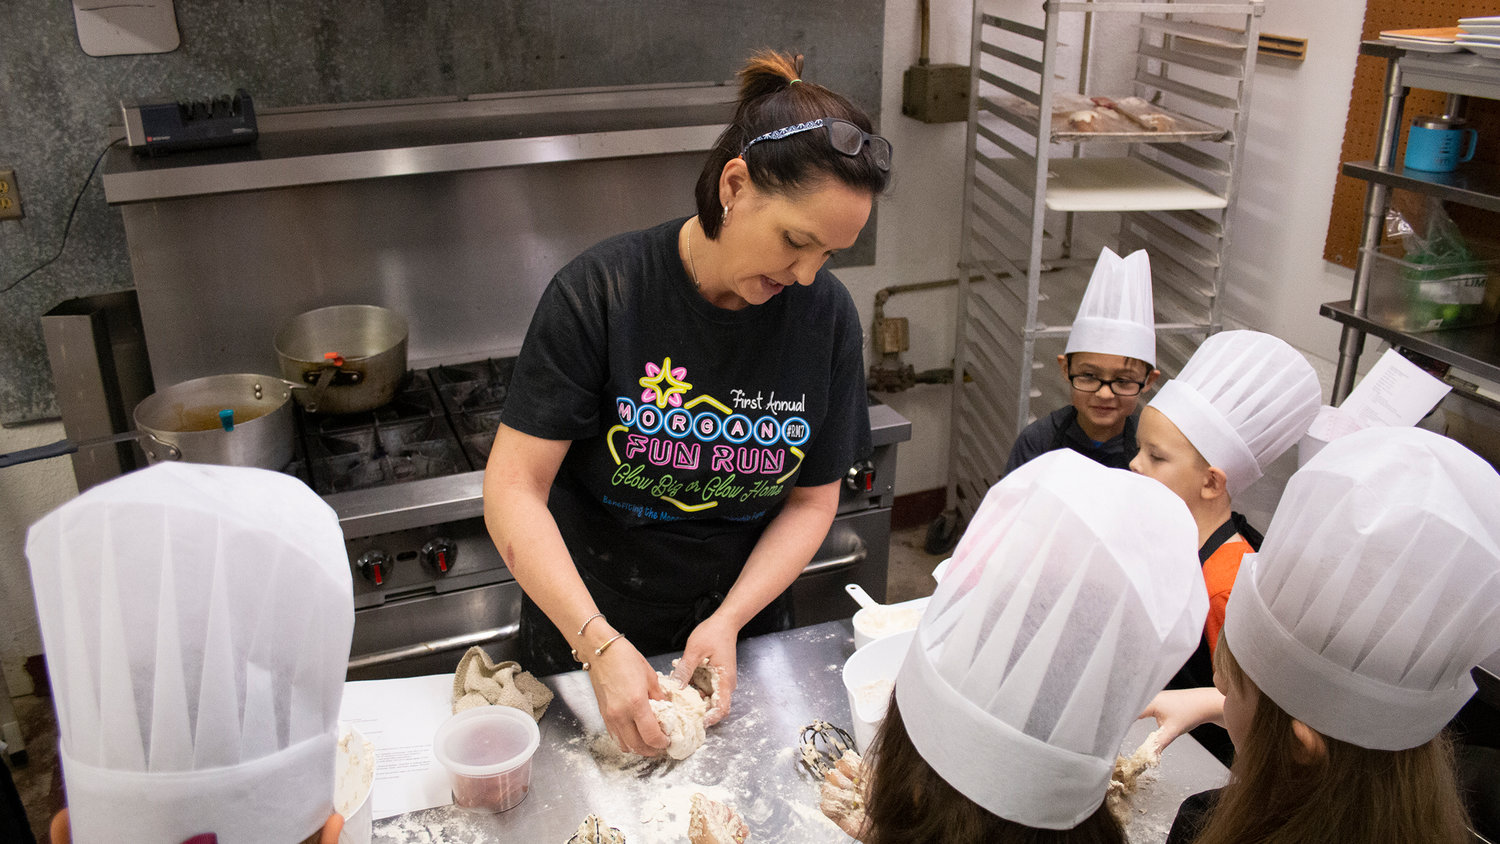 The Farmers Daughter owner Sarah Tenberg hosted a children’s cooking class on Saturday, Feb. 1. Tenberg plans to host more cooking classes for all ages in the near future.